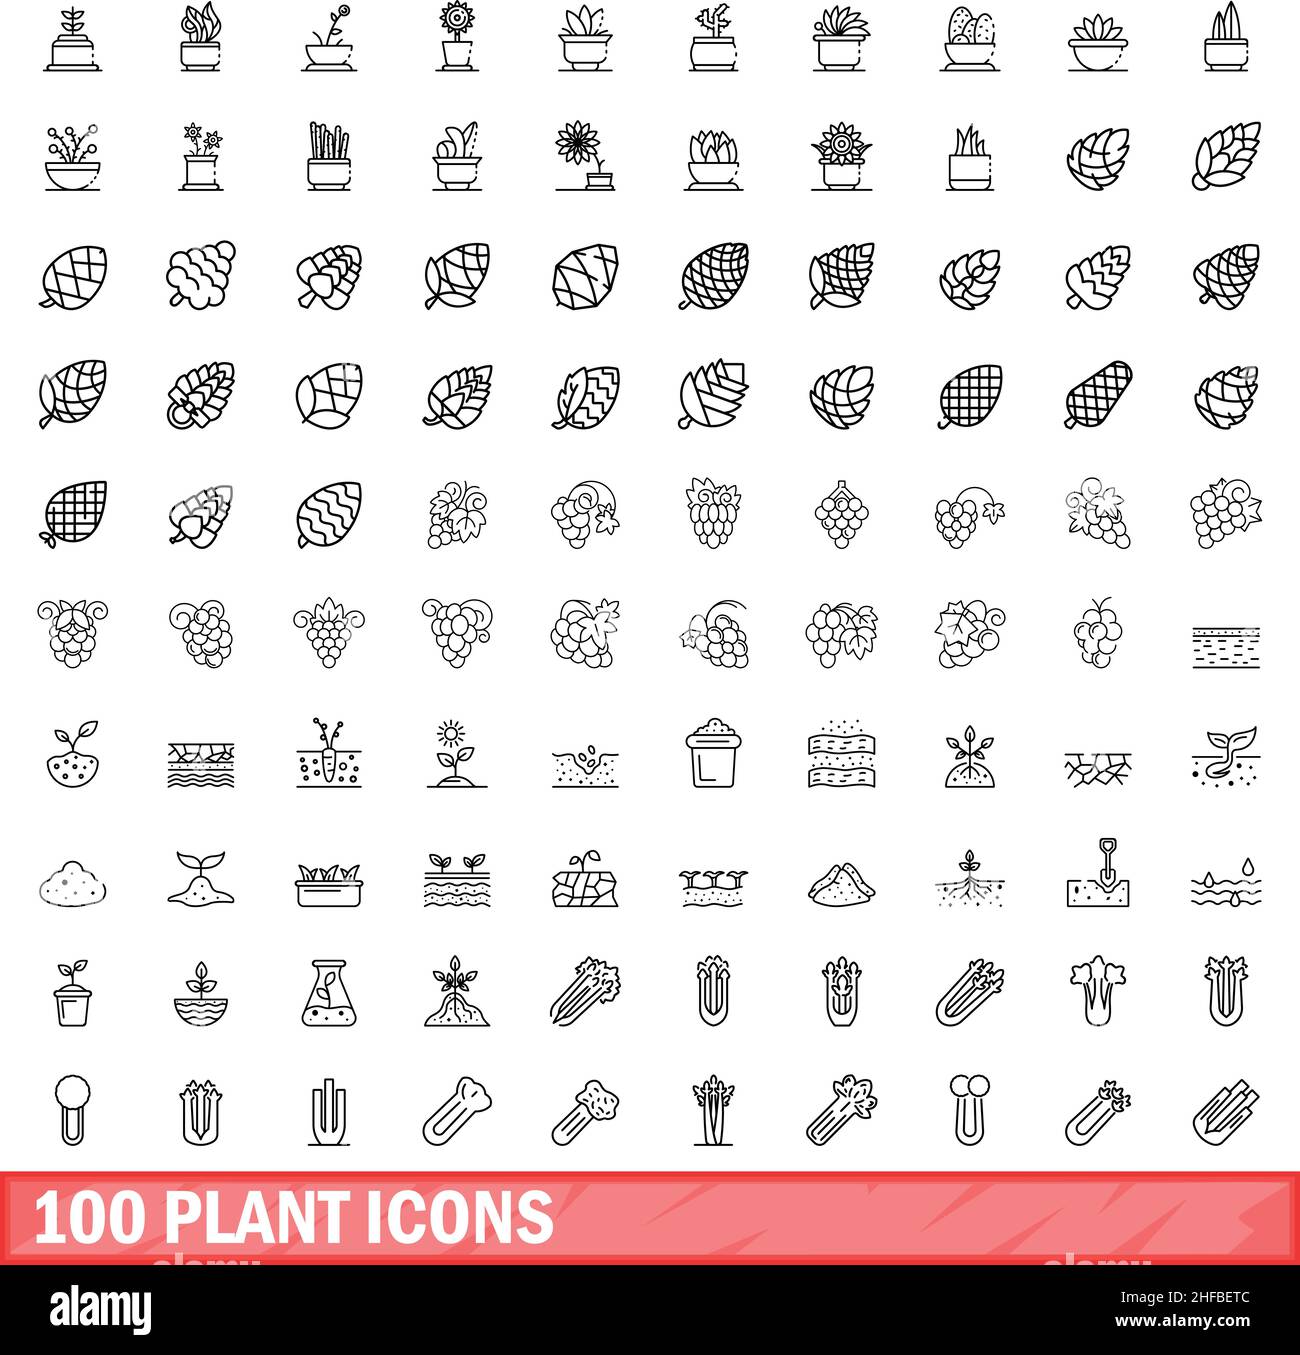 100 plant icons set. Outline illustration of 100 plant icons vector set isolated on white background Stock Vector